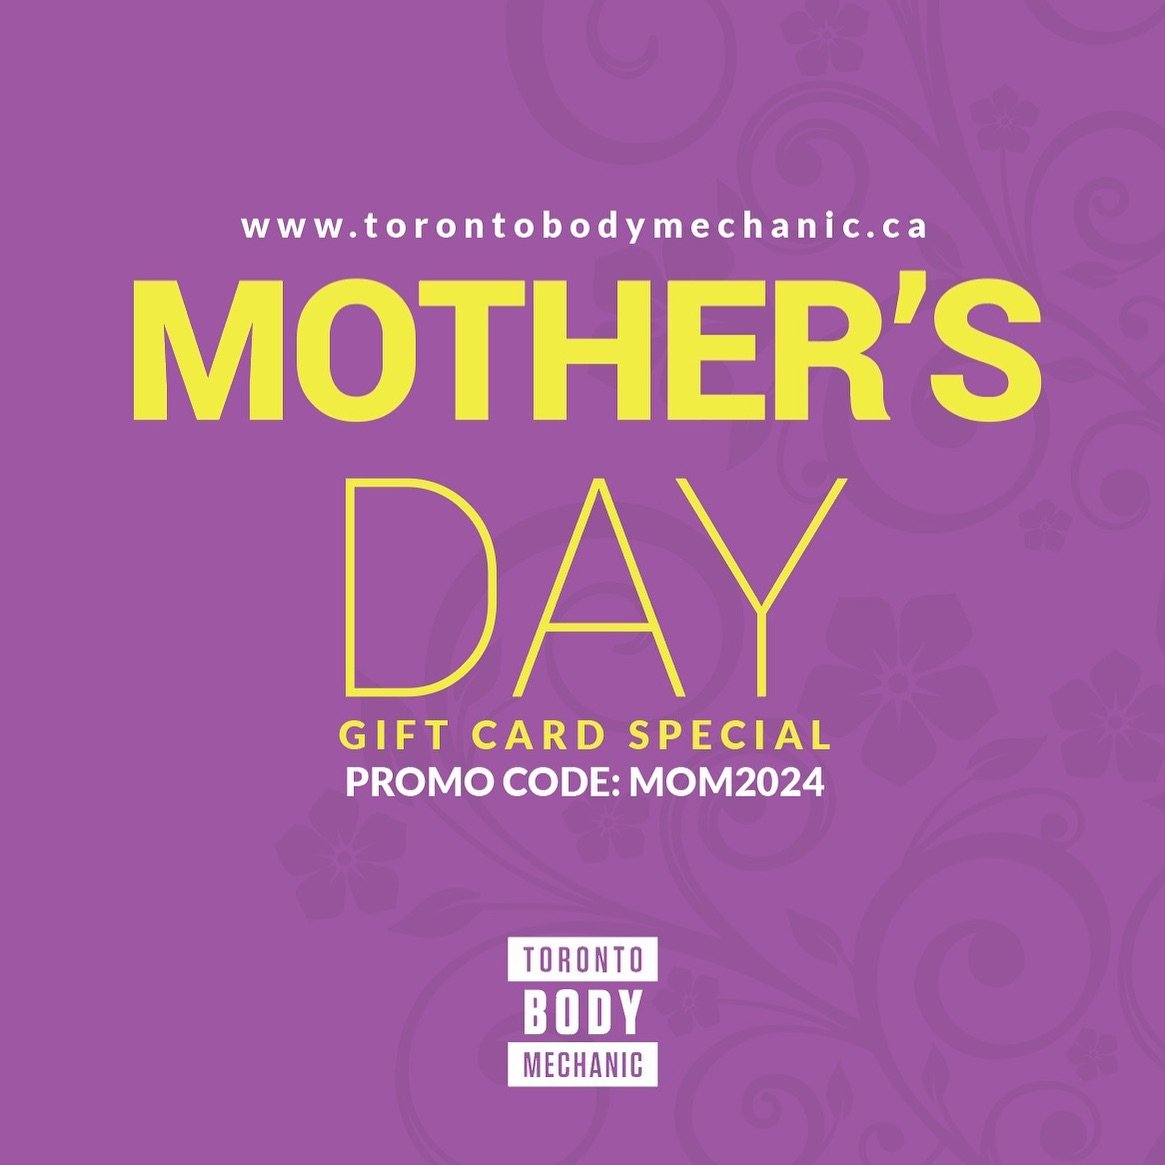 Give Mom the gift of relaxation this Mother&rsquo;s Day with our rejuvenating massage therapy gift cards!

Purchase online @ www.torontobodymechanic.ca 
PROMO CODE: MOM2024

#MothersDay #GiftOfRelaxation #MassageTherapy #WellnessGift #SelfCareSunday 